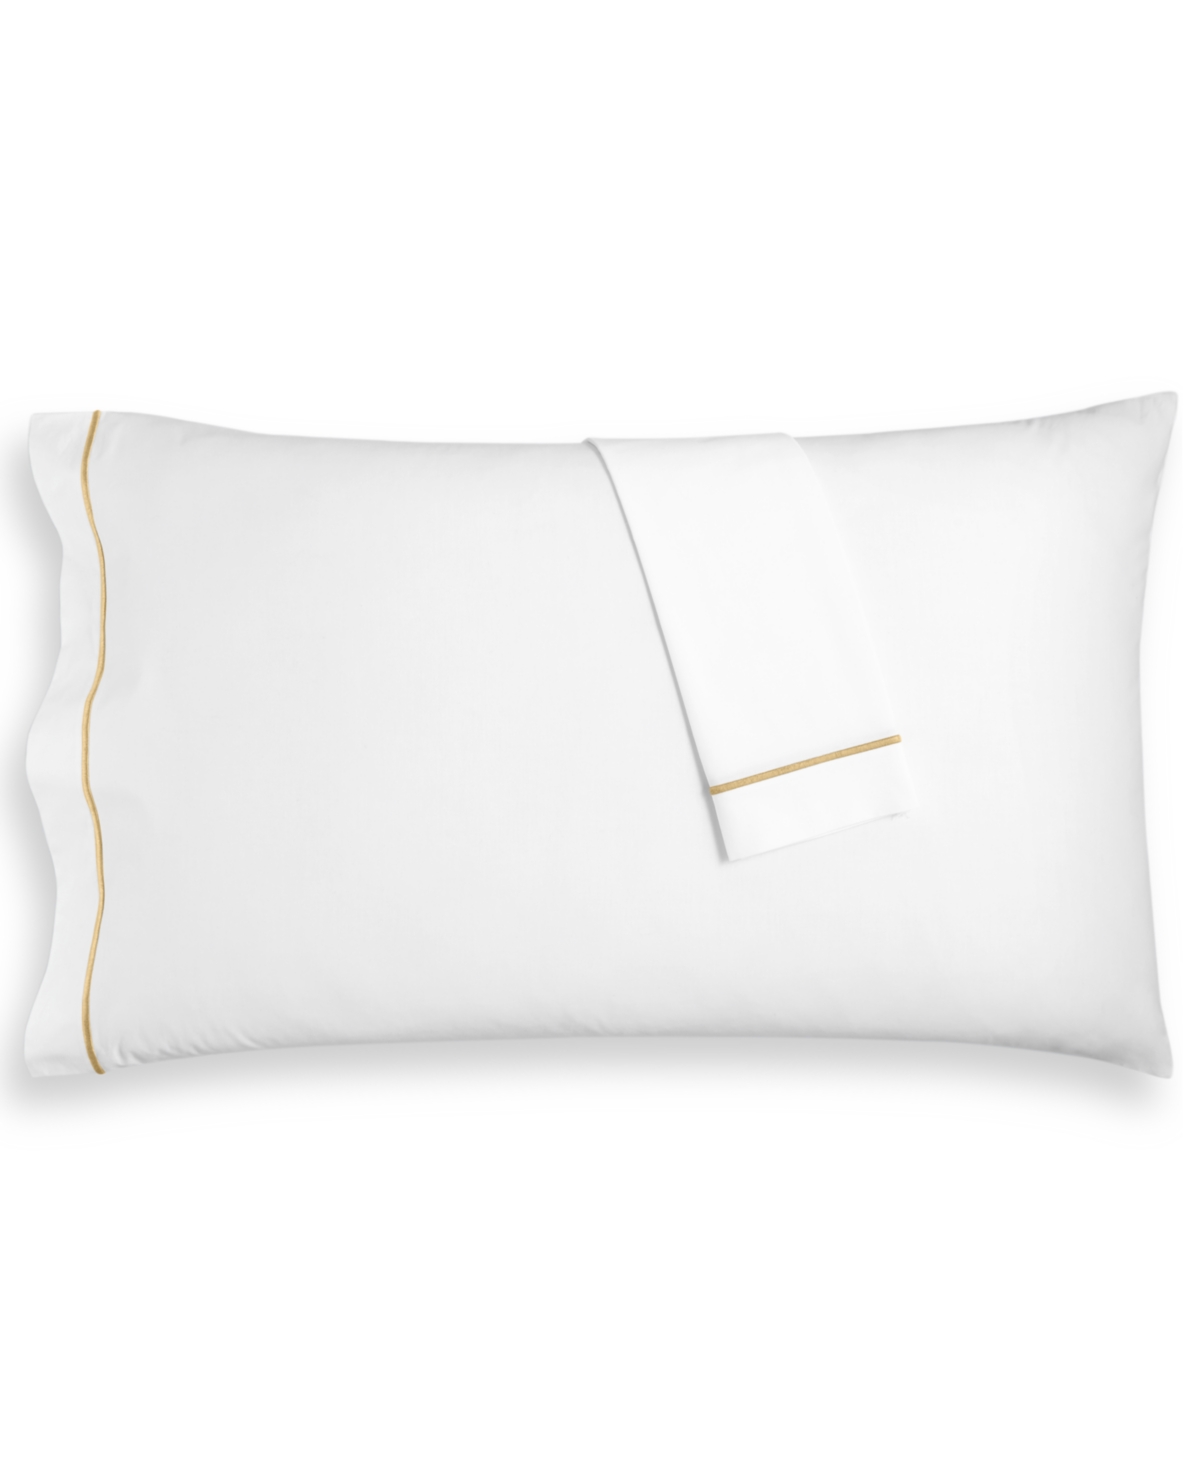 Hotel Collection Italian Percale 100% Cotton Pillowcase Pair, King, Created For Macy's In Soft Gold